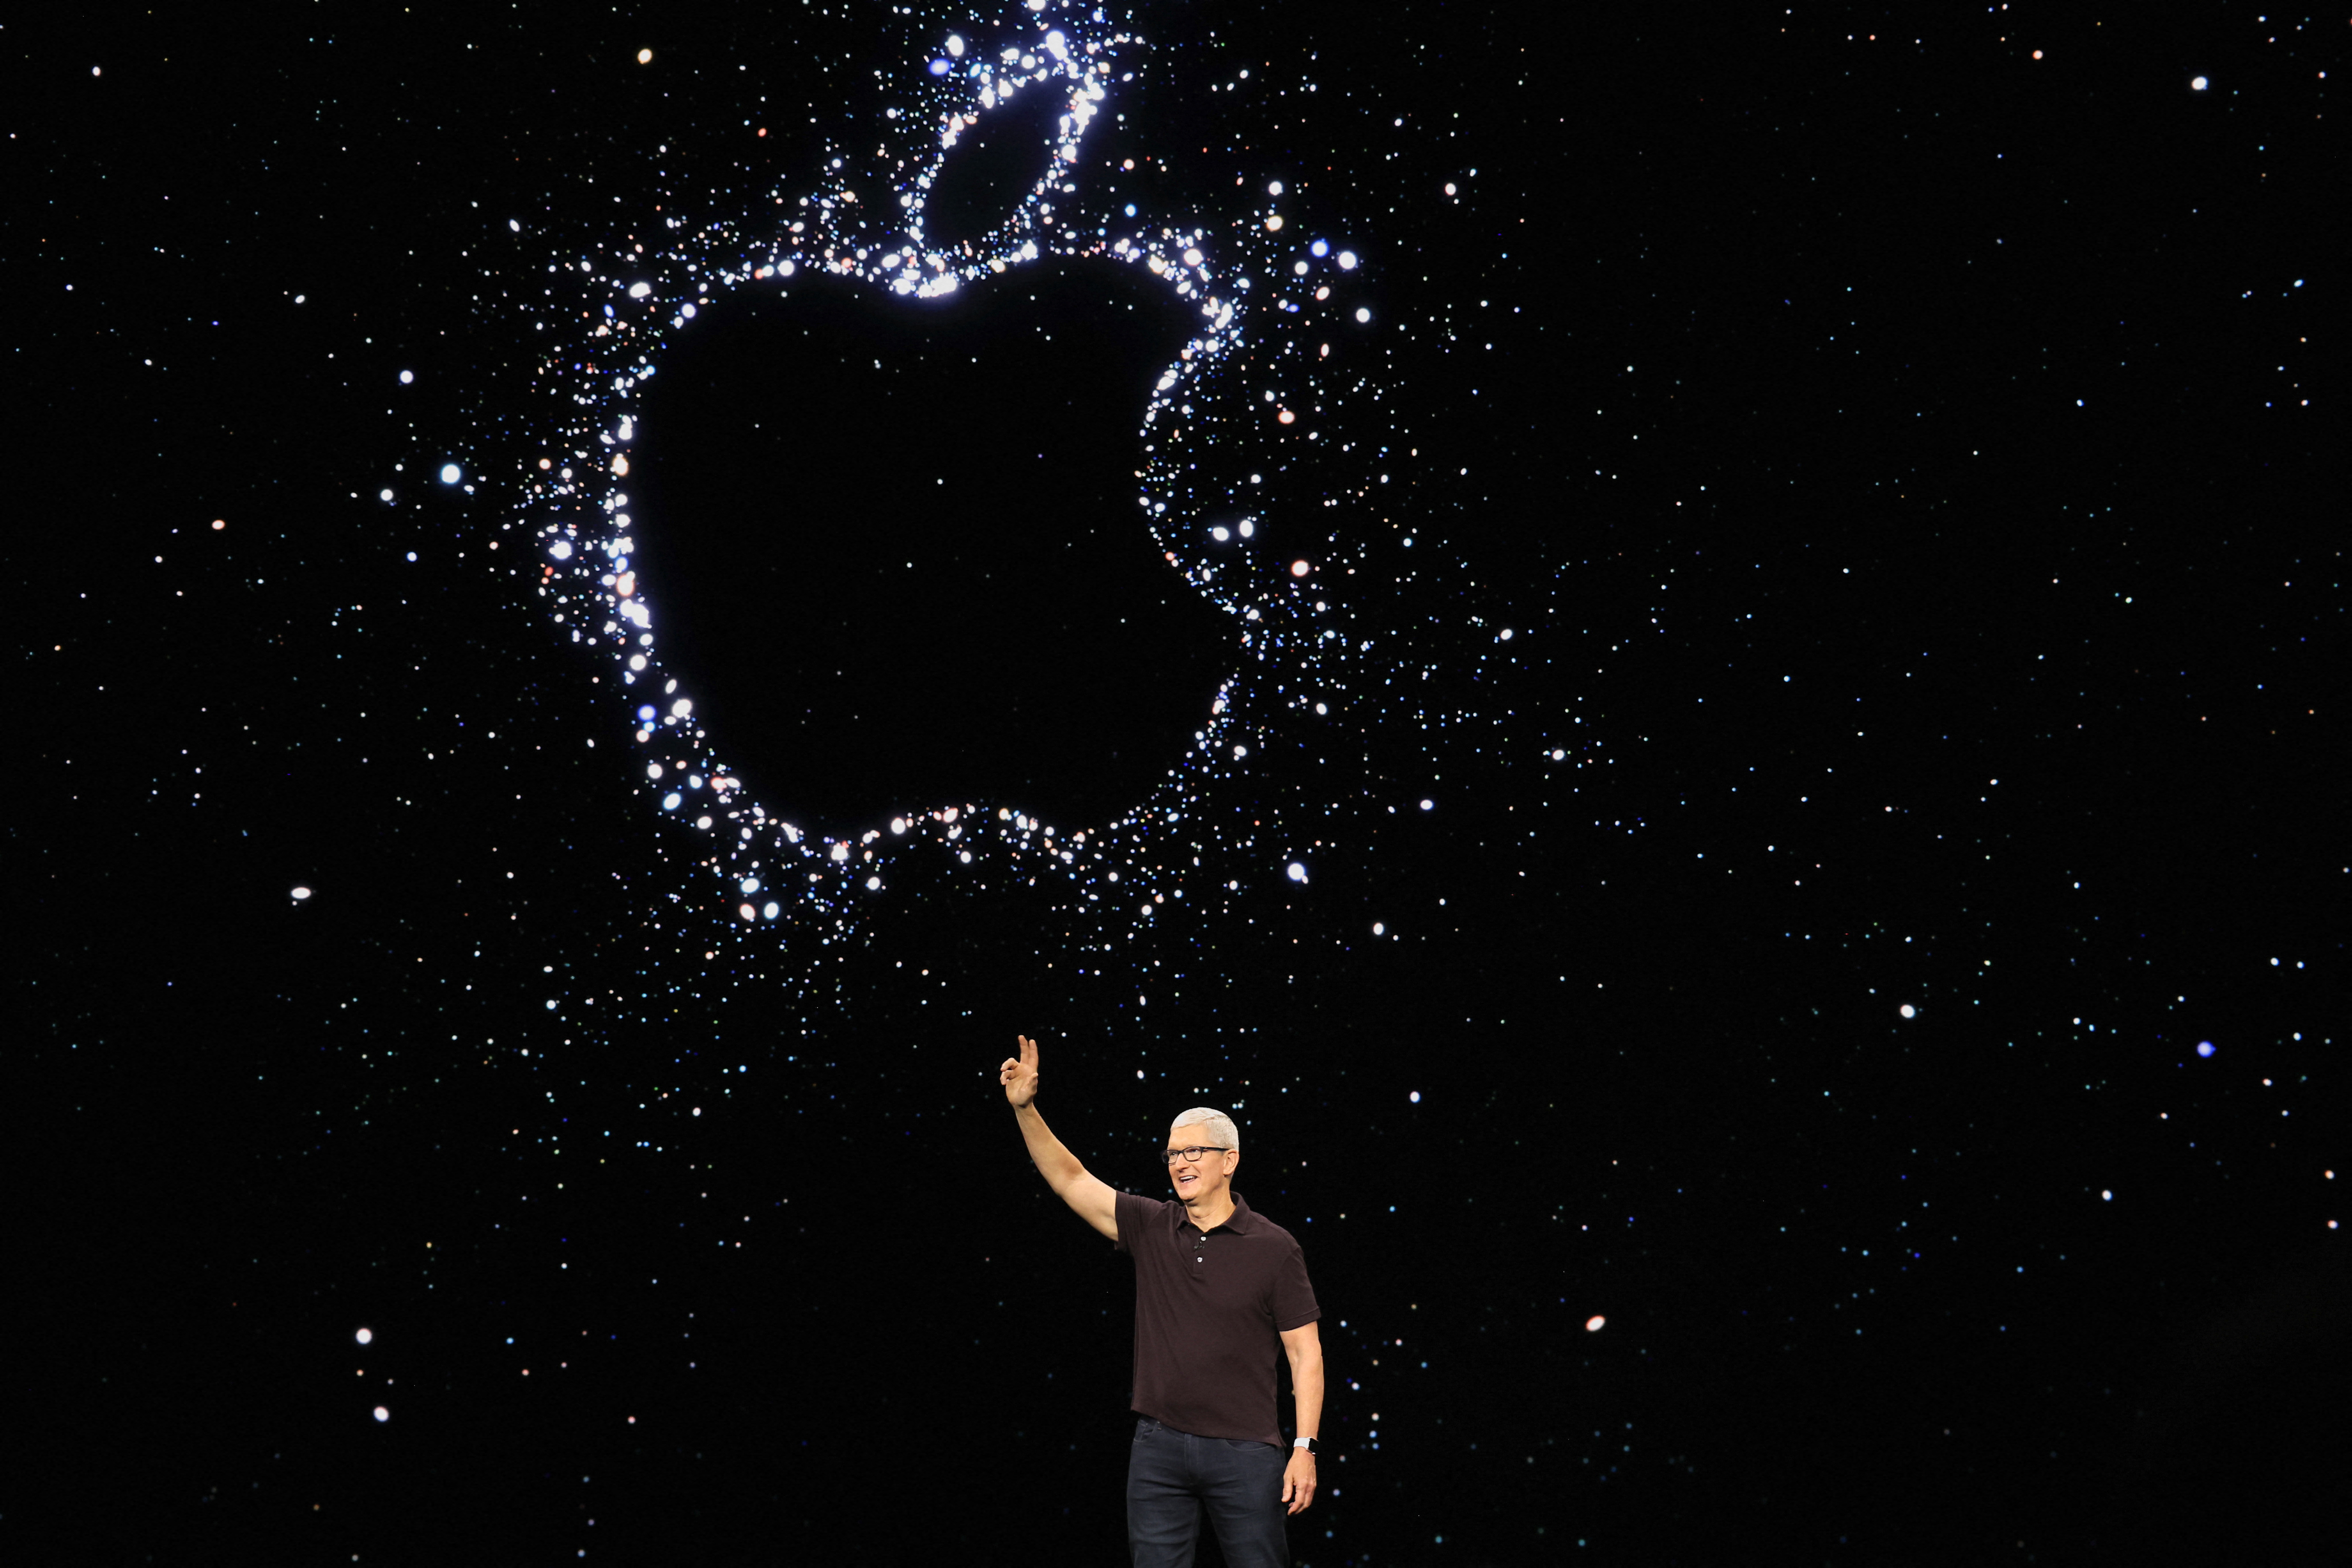 Apple CEO Tim Cook presents the new iPhone 14 at an Apple event at their headquarters in Cupertino, California, U.S. September 7, 2022.